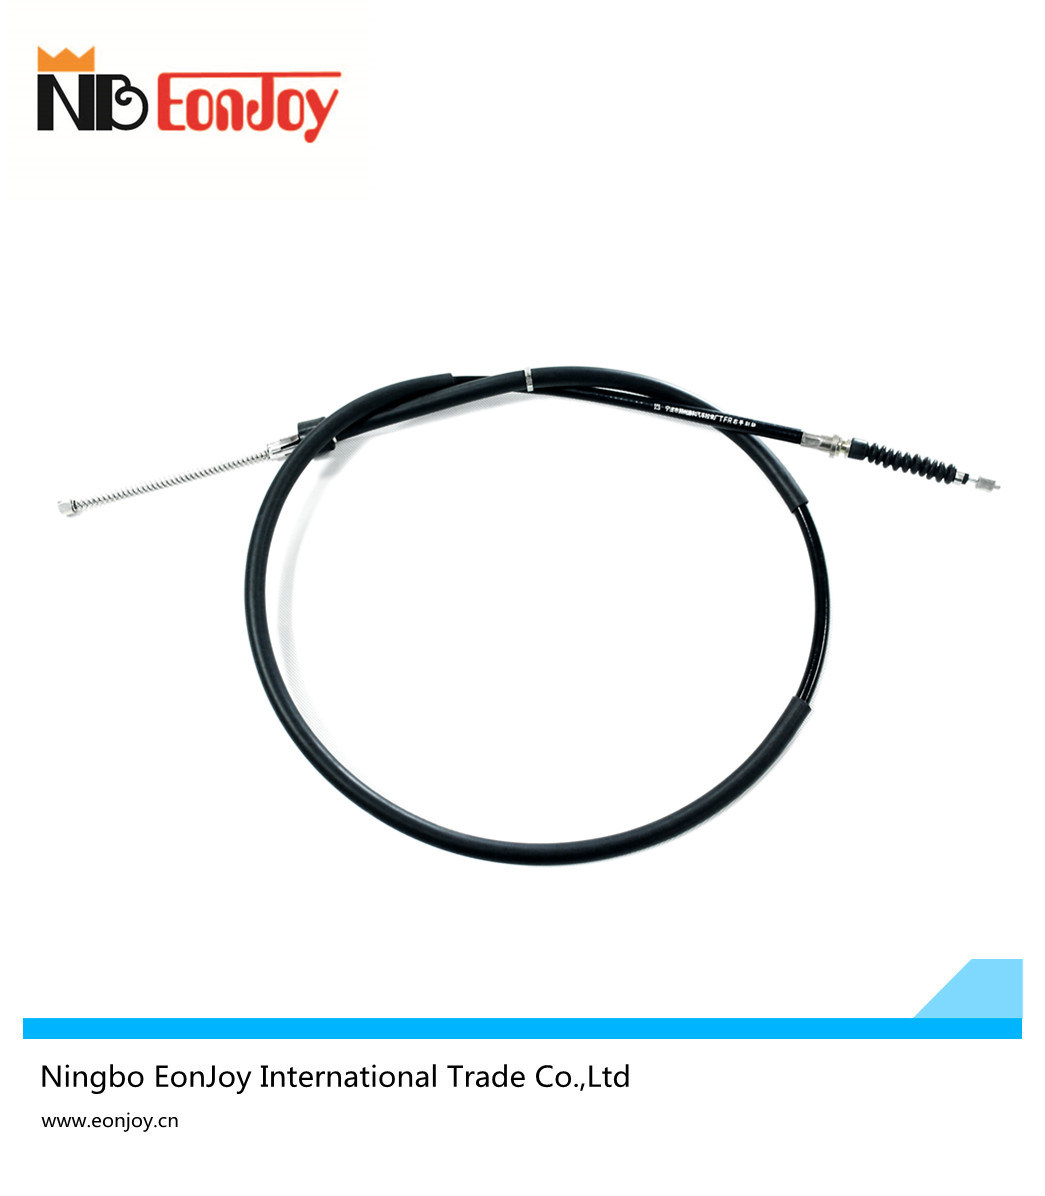 Right Rear Hand Brake Cable for Tfr of Jiangling Motors